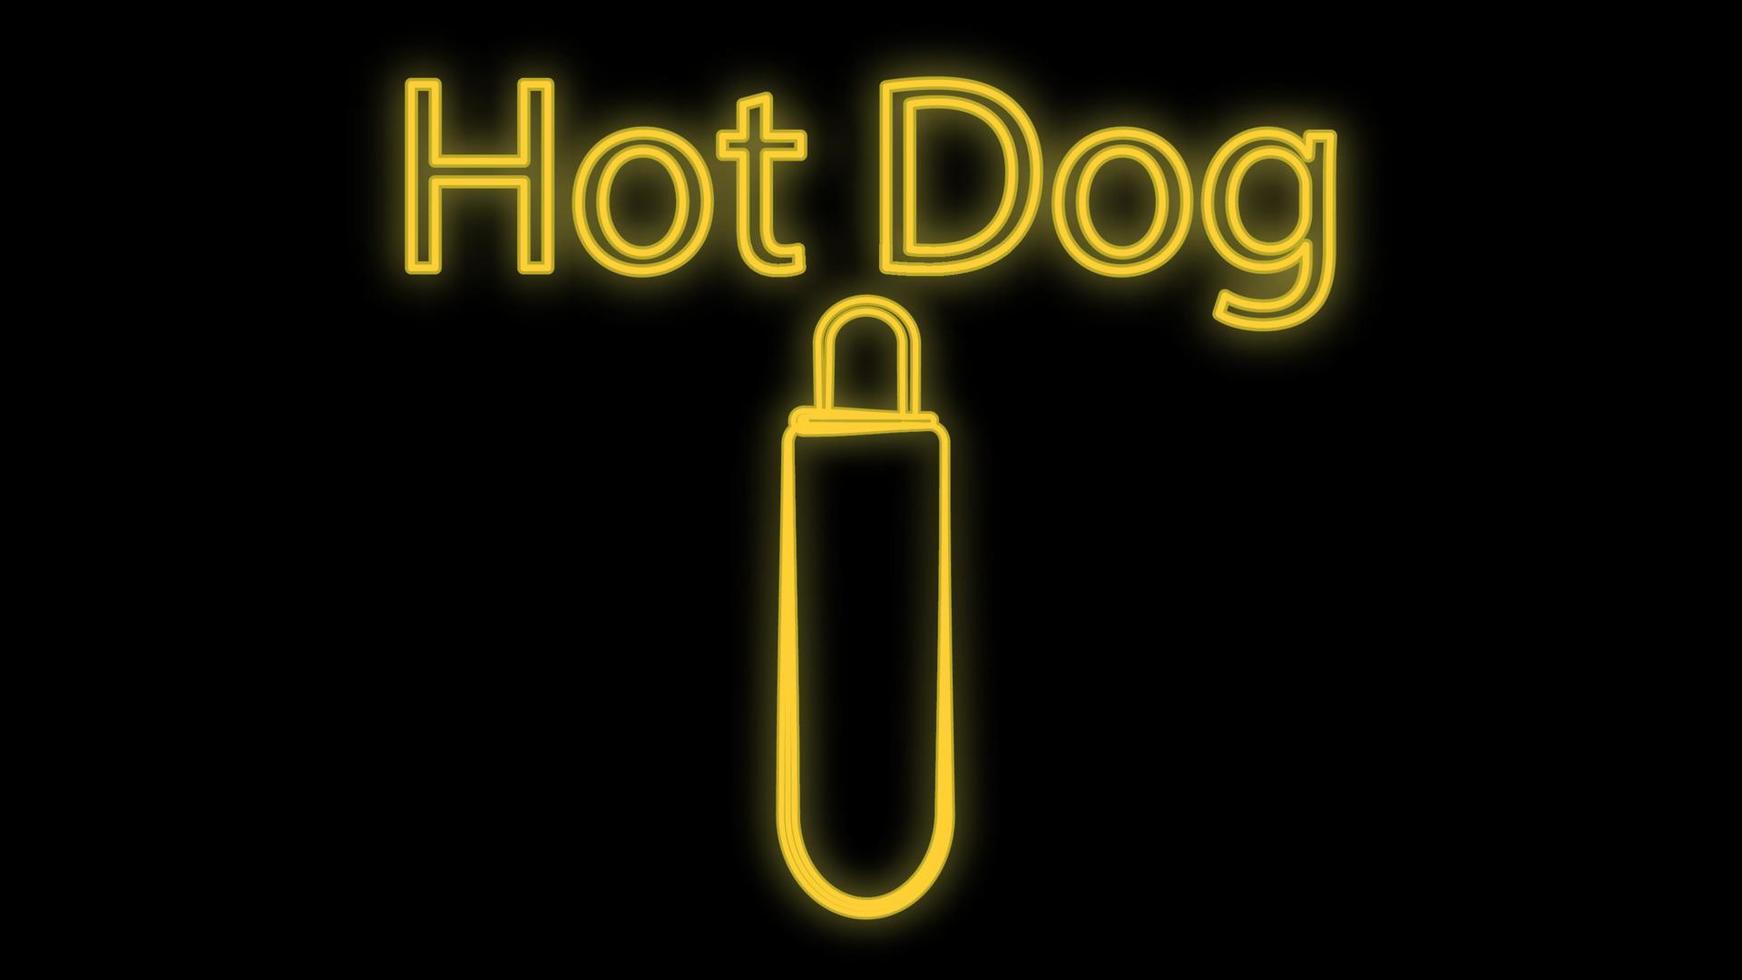 hot dog on a black background, neon, vector illustration. sausage sandwich, stuffed, appetizing bun. neon with an inscription in yellow. bright signboard for cafe, restaurant